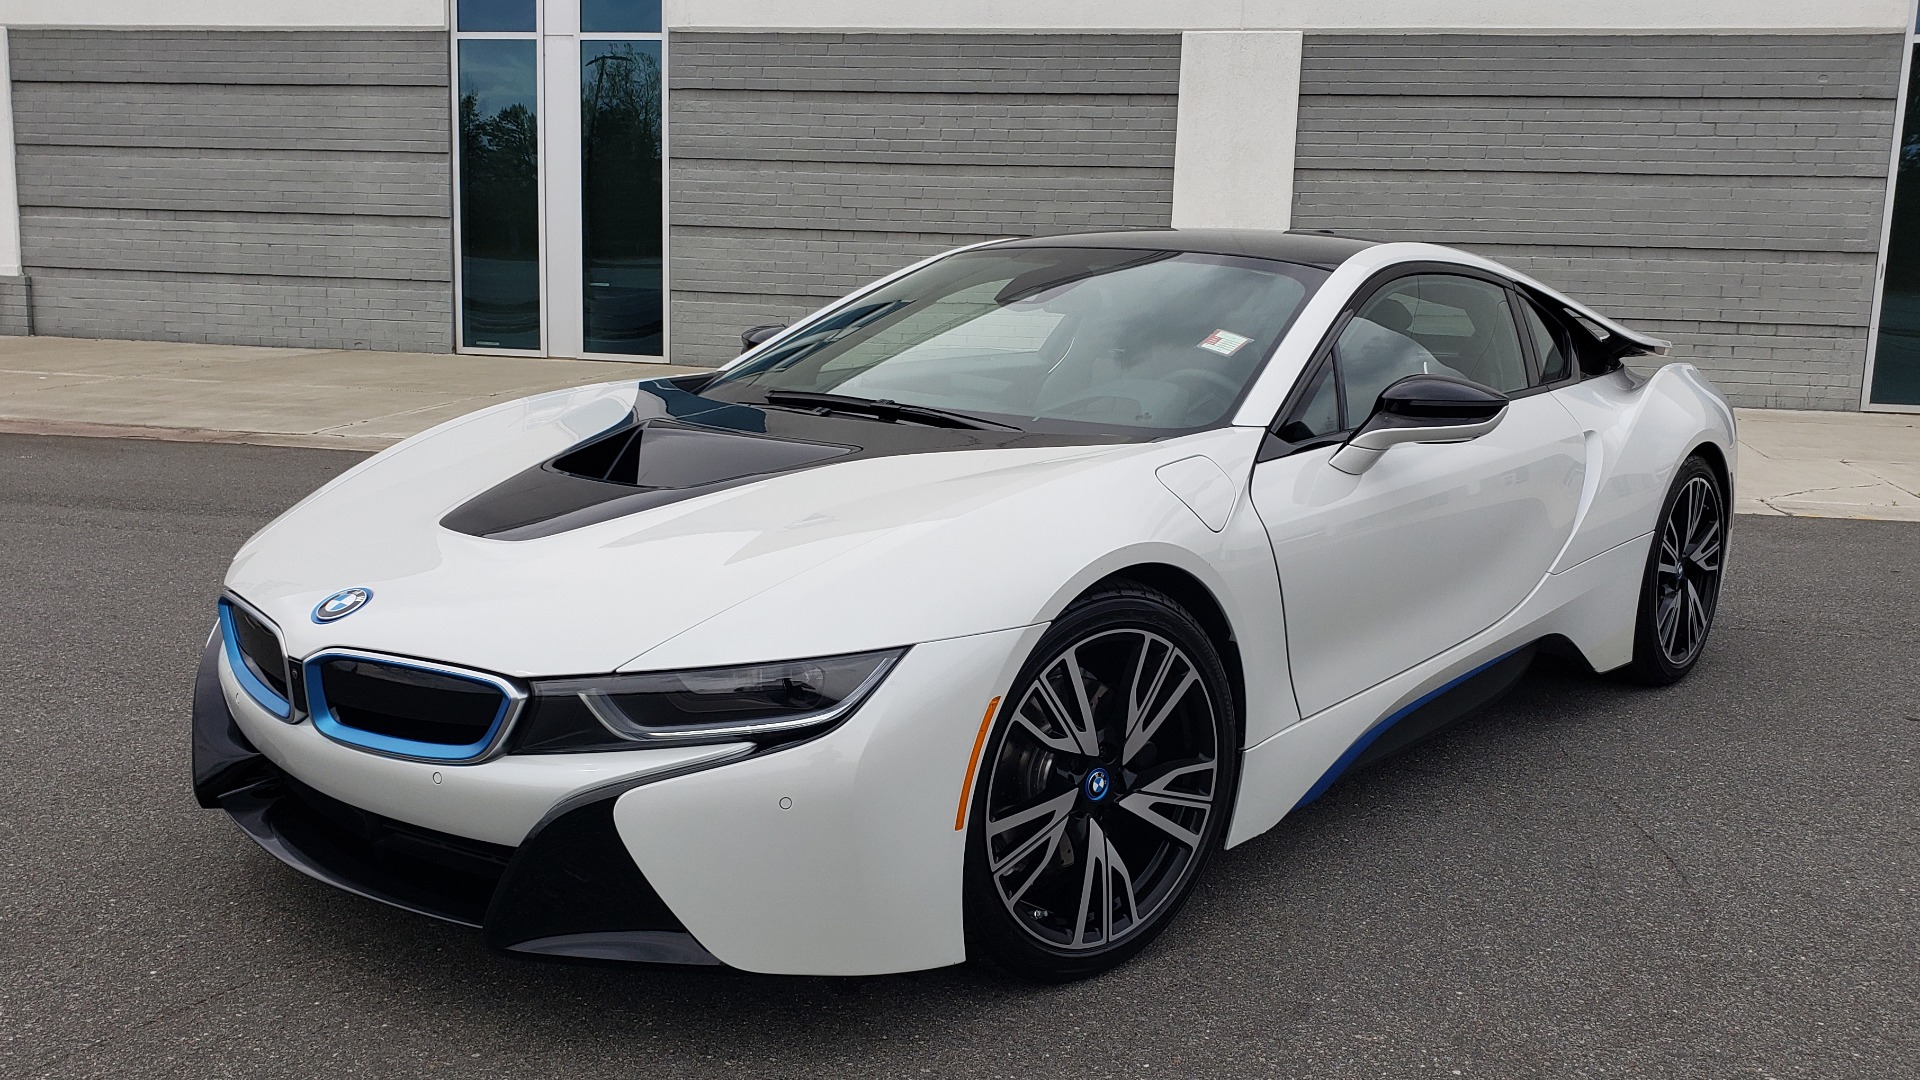 Used 2016 BMW i8 COUPE / GIGA WORLD / NAV / HUD / 20IN WHEELS / REARVIEW for sale Sold at Formula Imports in Charlotte NC 28227 5